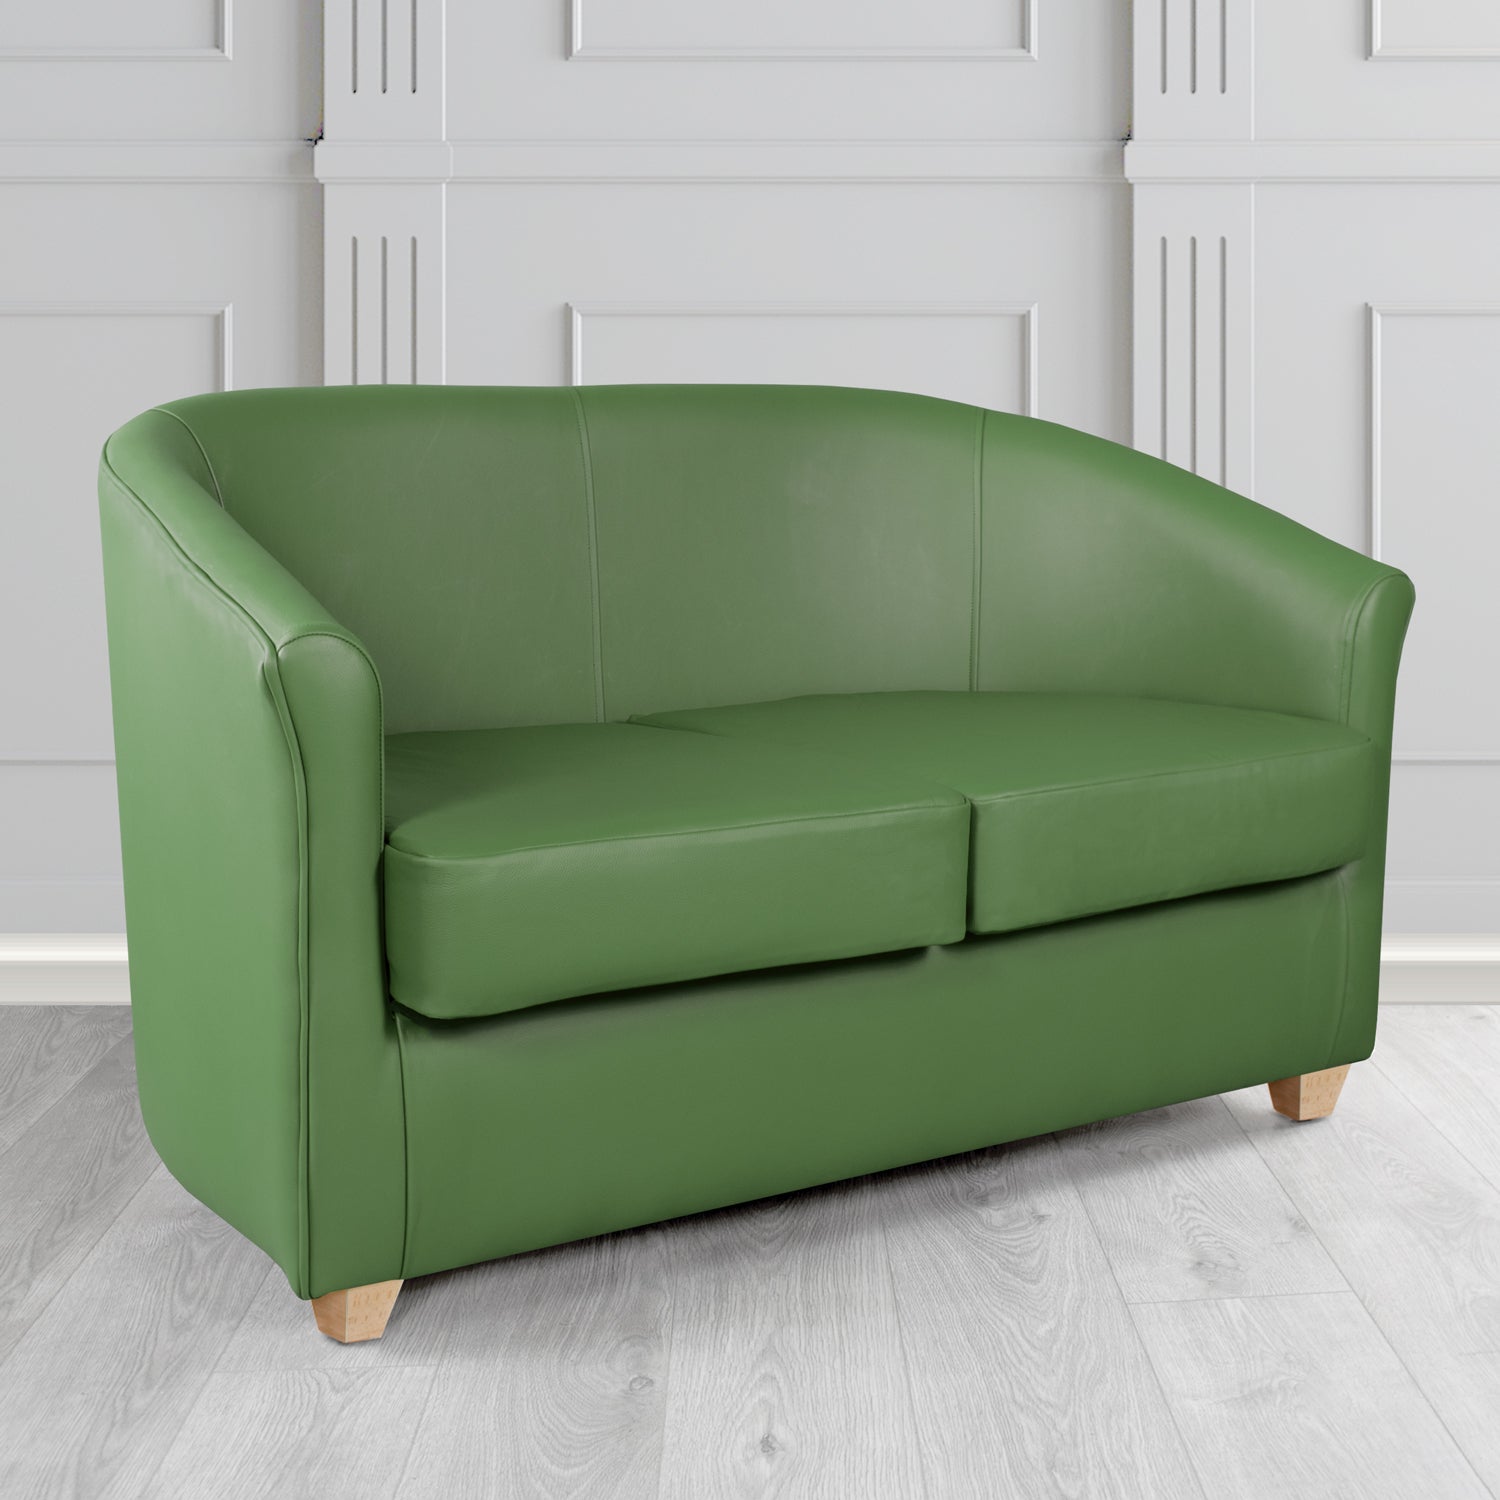 Cannes 2 Seater Tub Sofa in Just Colour Moss Crib 5 Faux Leather - The Tub Chair Shop